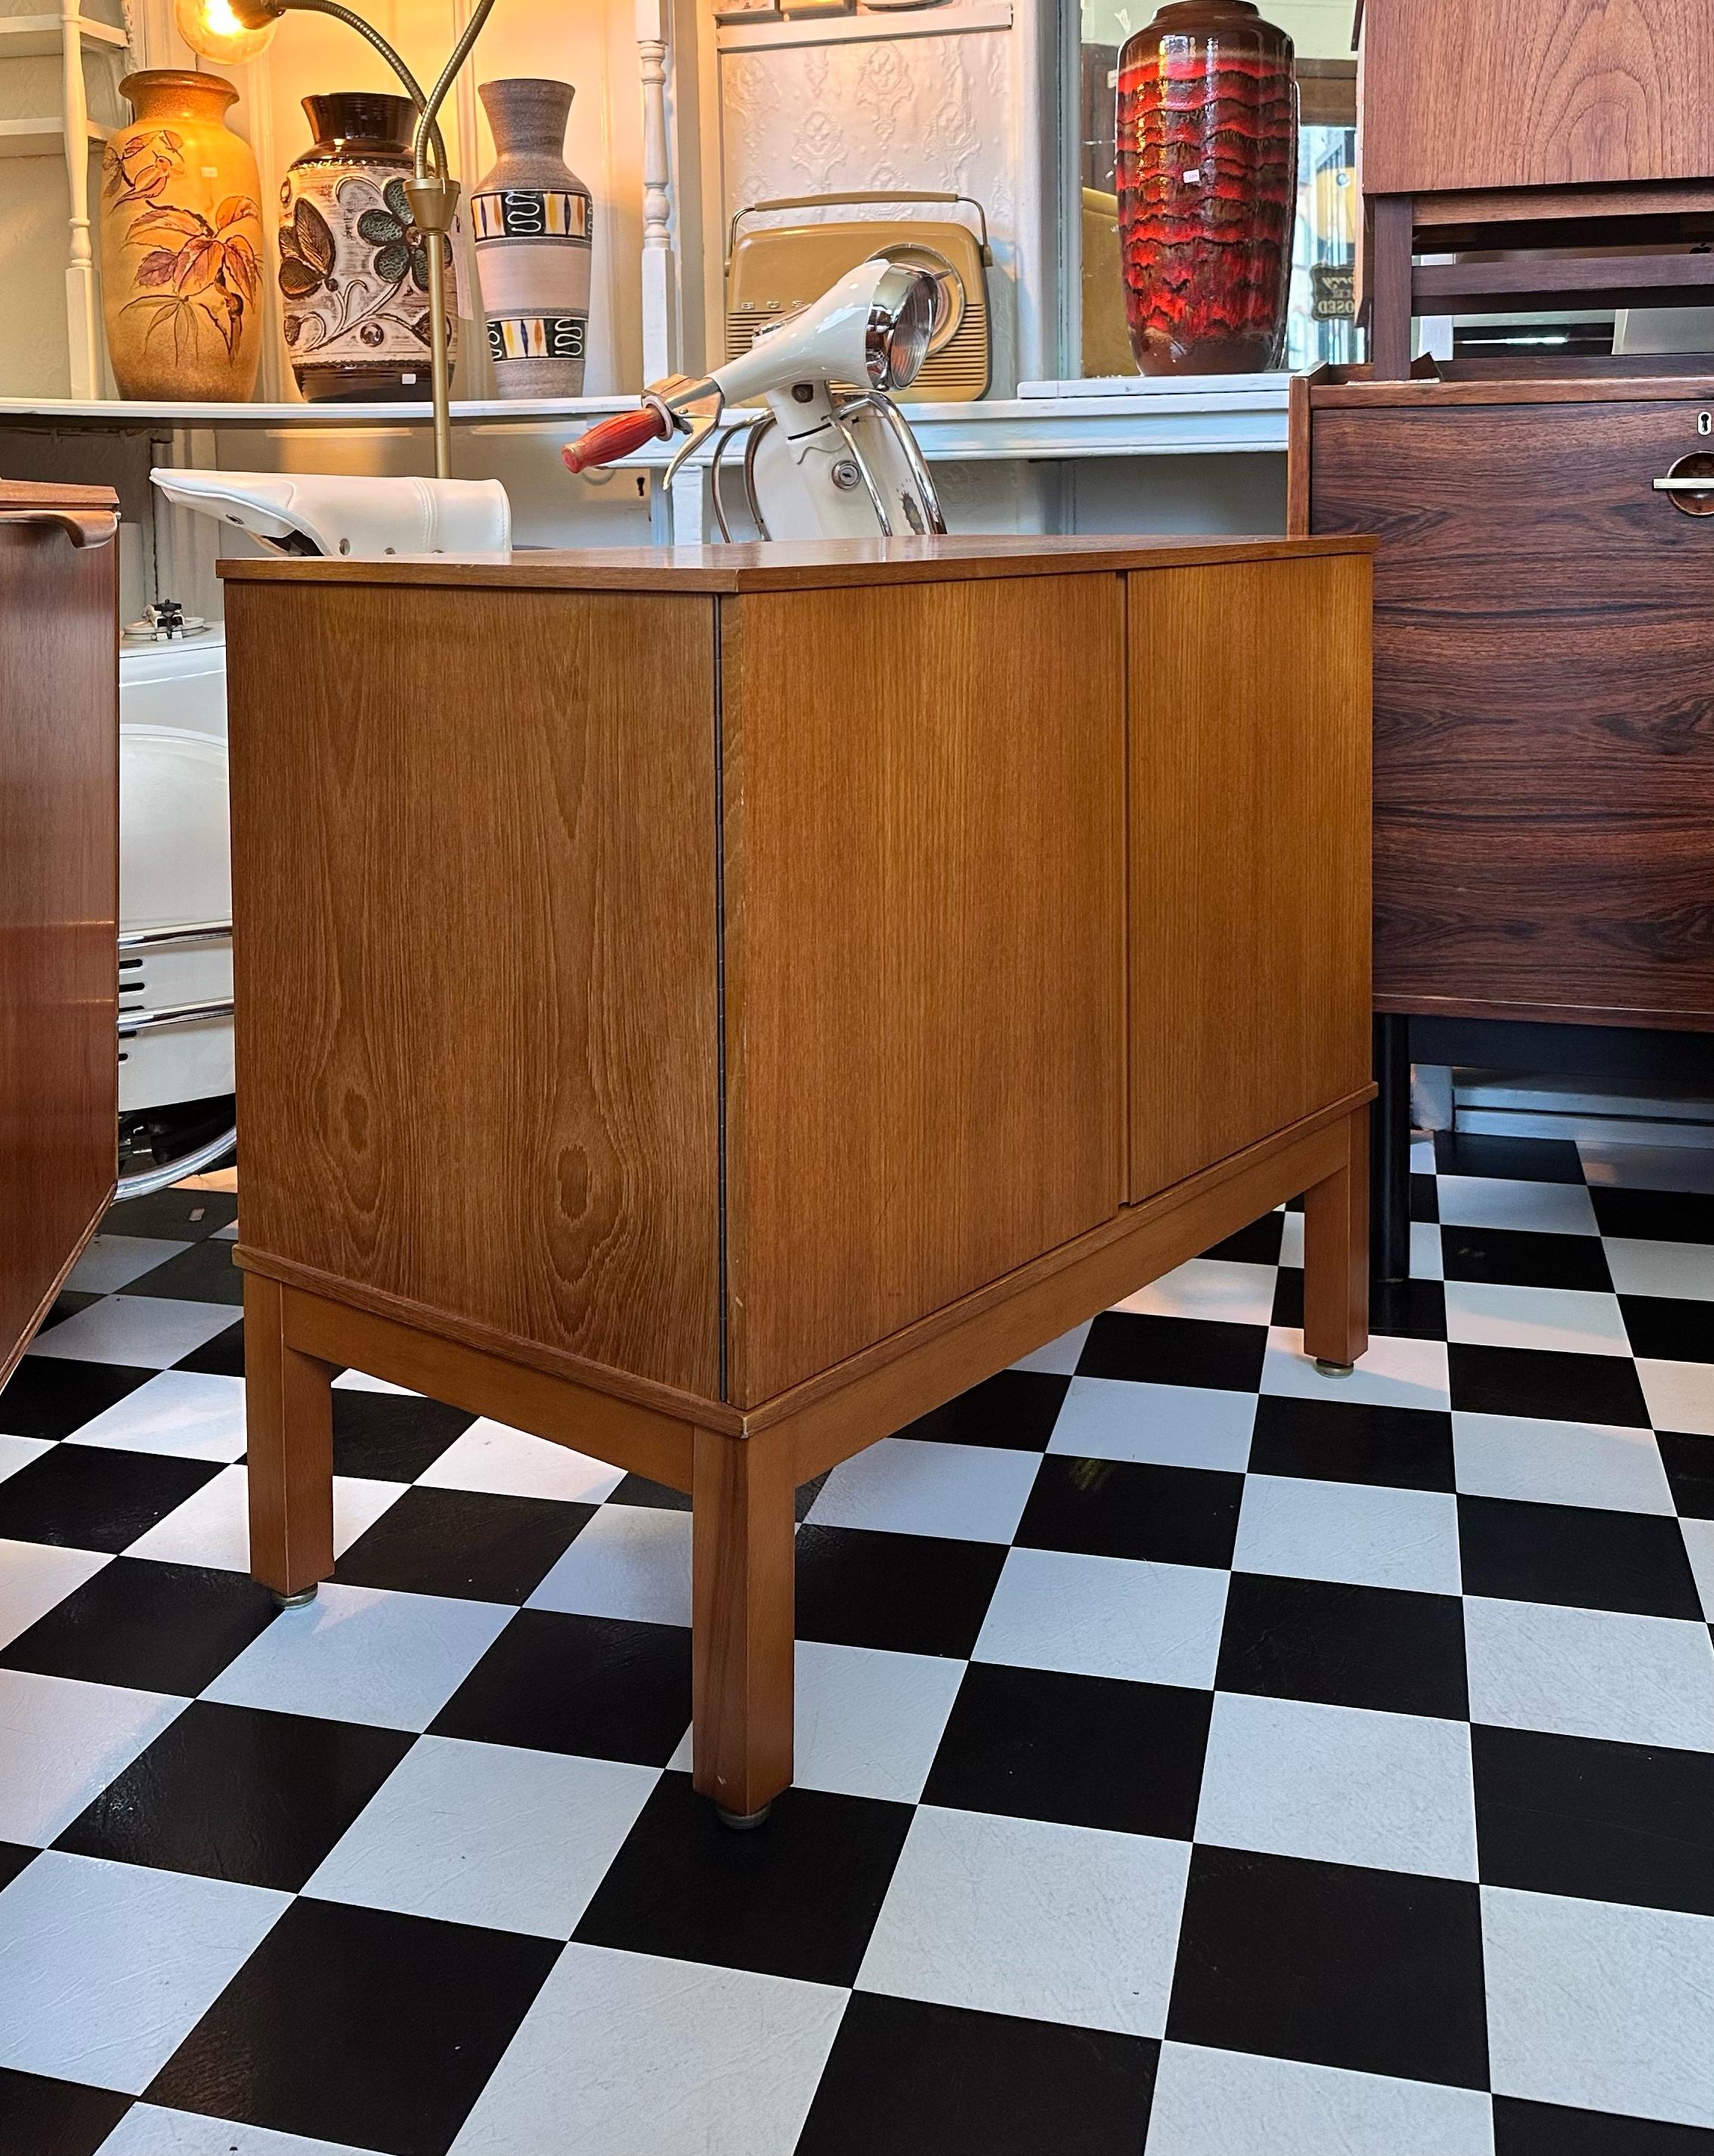 Stunning mid century modern vinyl / media / record cabinet.
Golden teak finish, with stylish legs and sleek doors, which reveal sliding shelf and four storage compartments.
Beautiful compact piece which offers plenty of storage.
This would make a